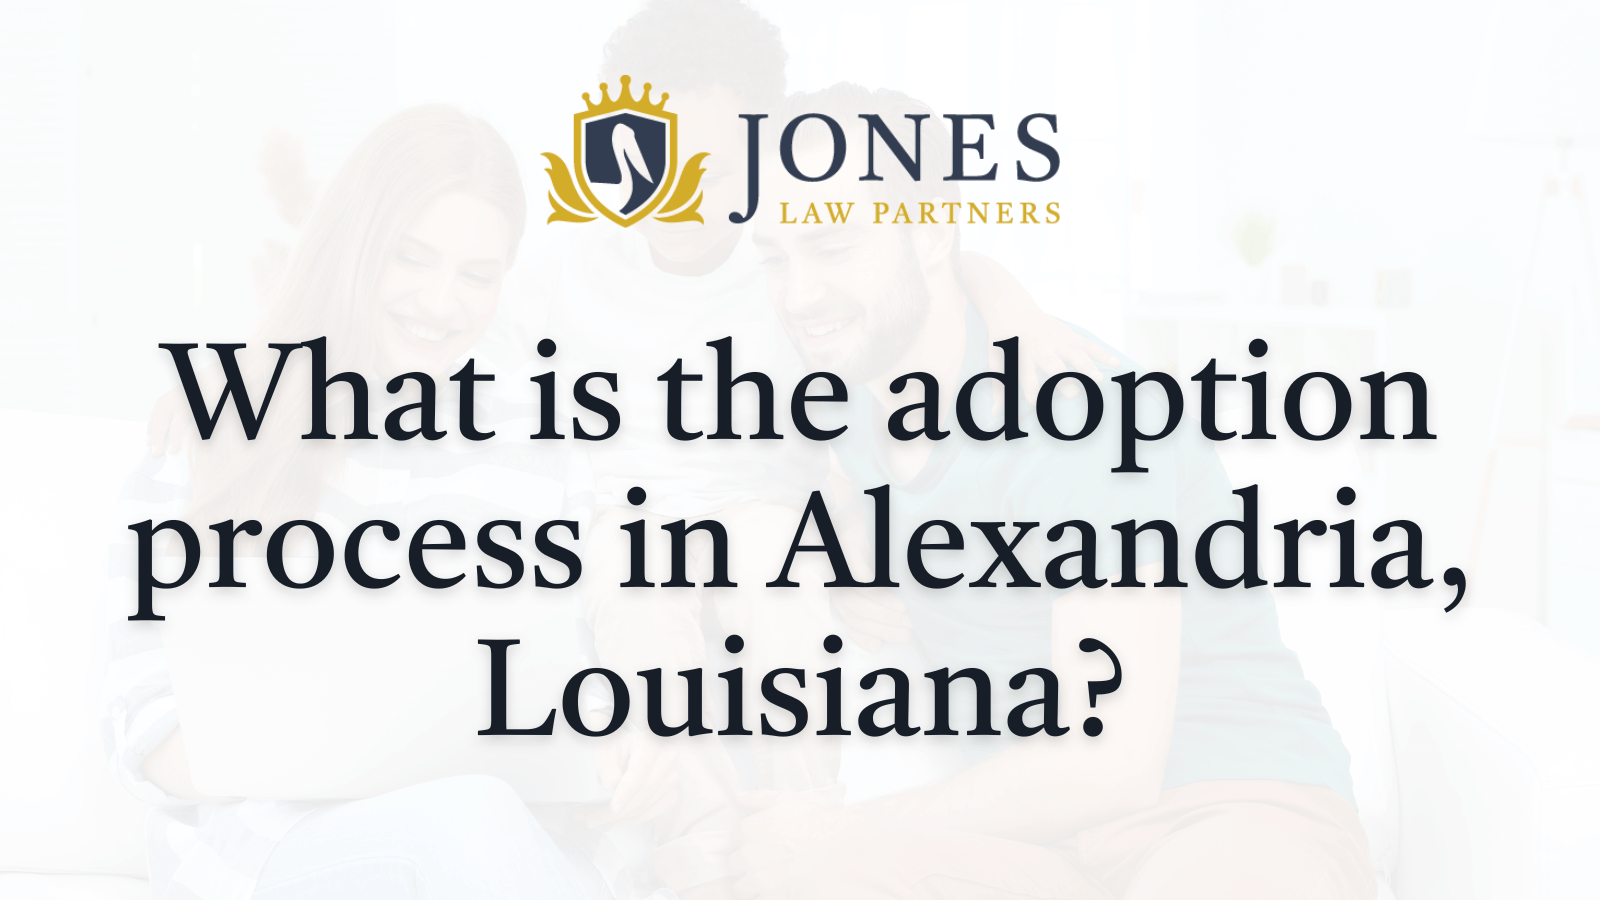 What is the adoption process in Alexandria Louisiana- Jones Law Partners - alexandria louisiana